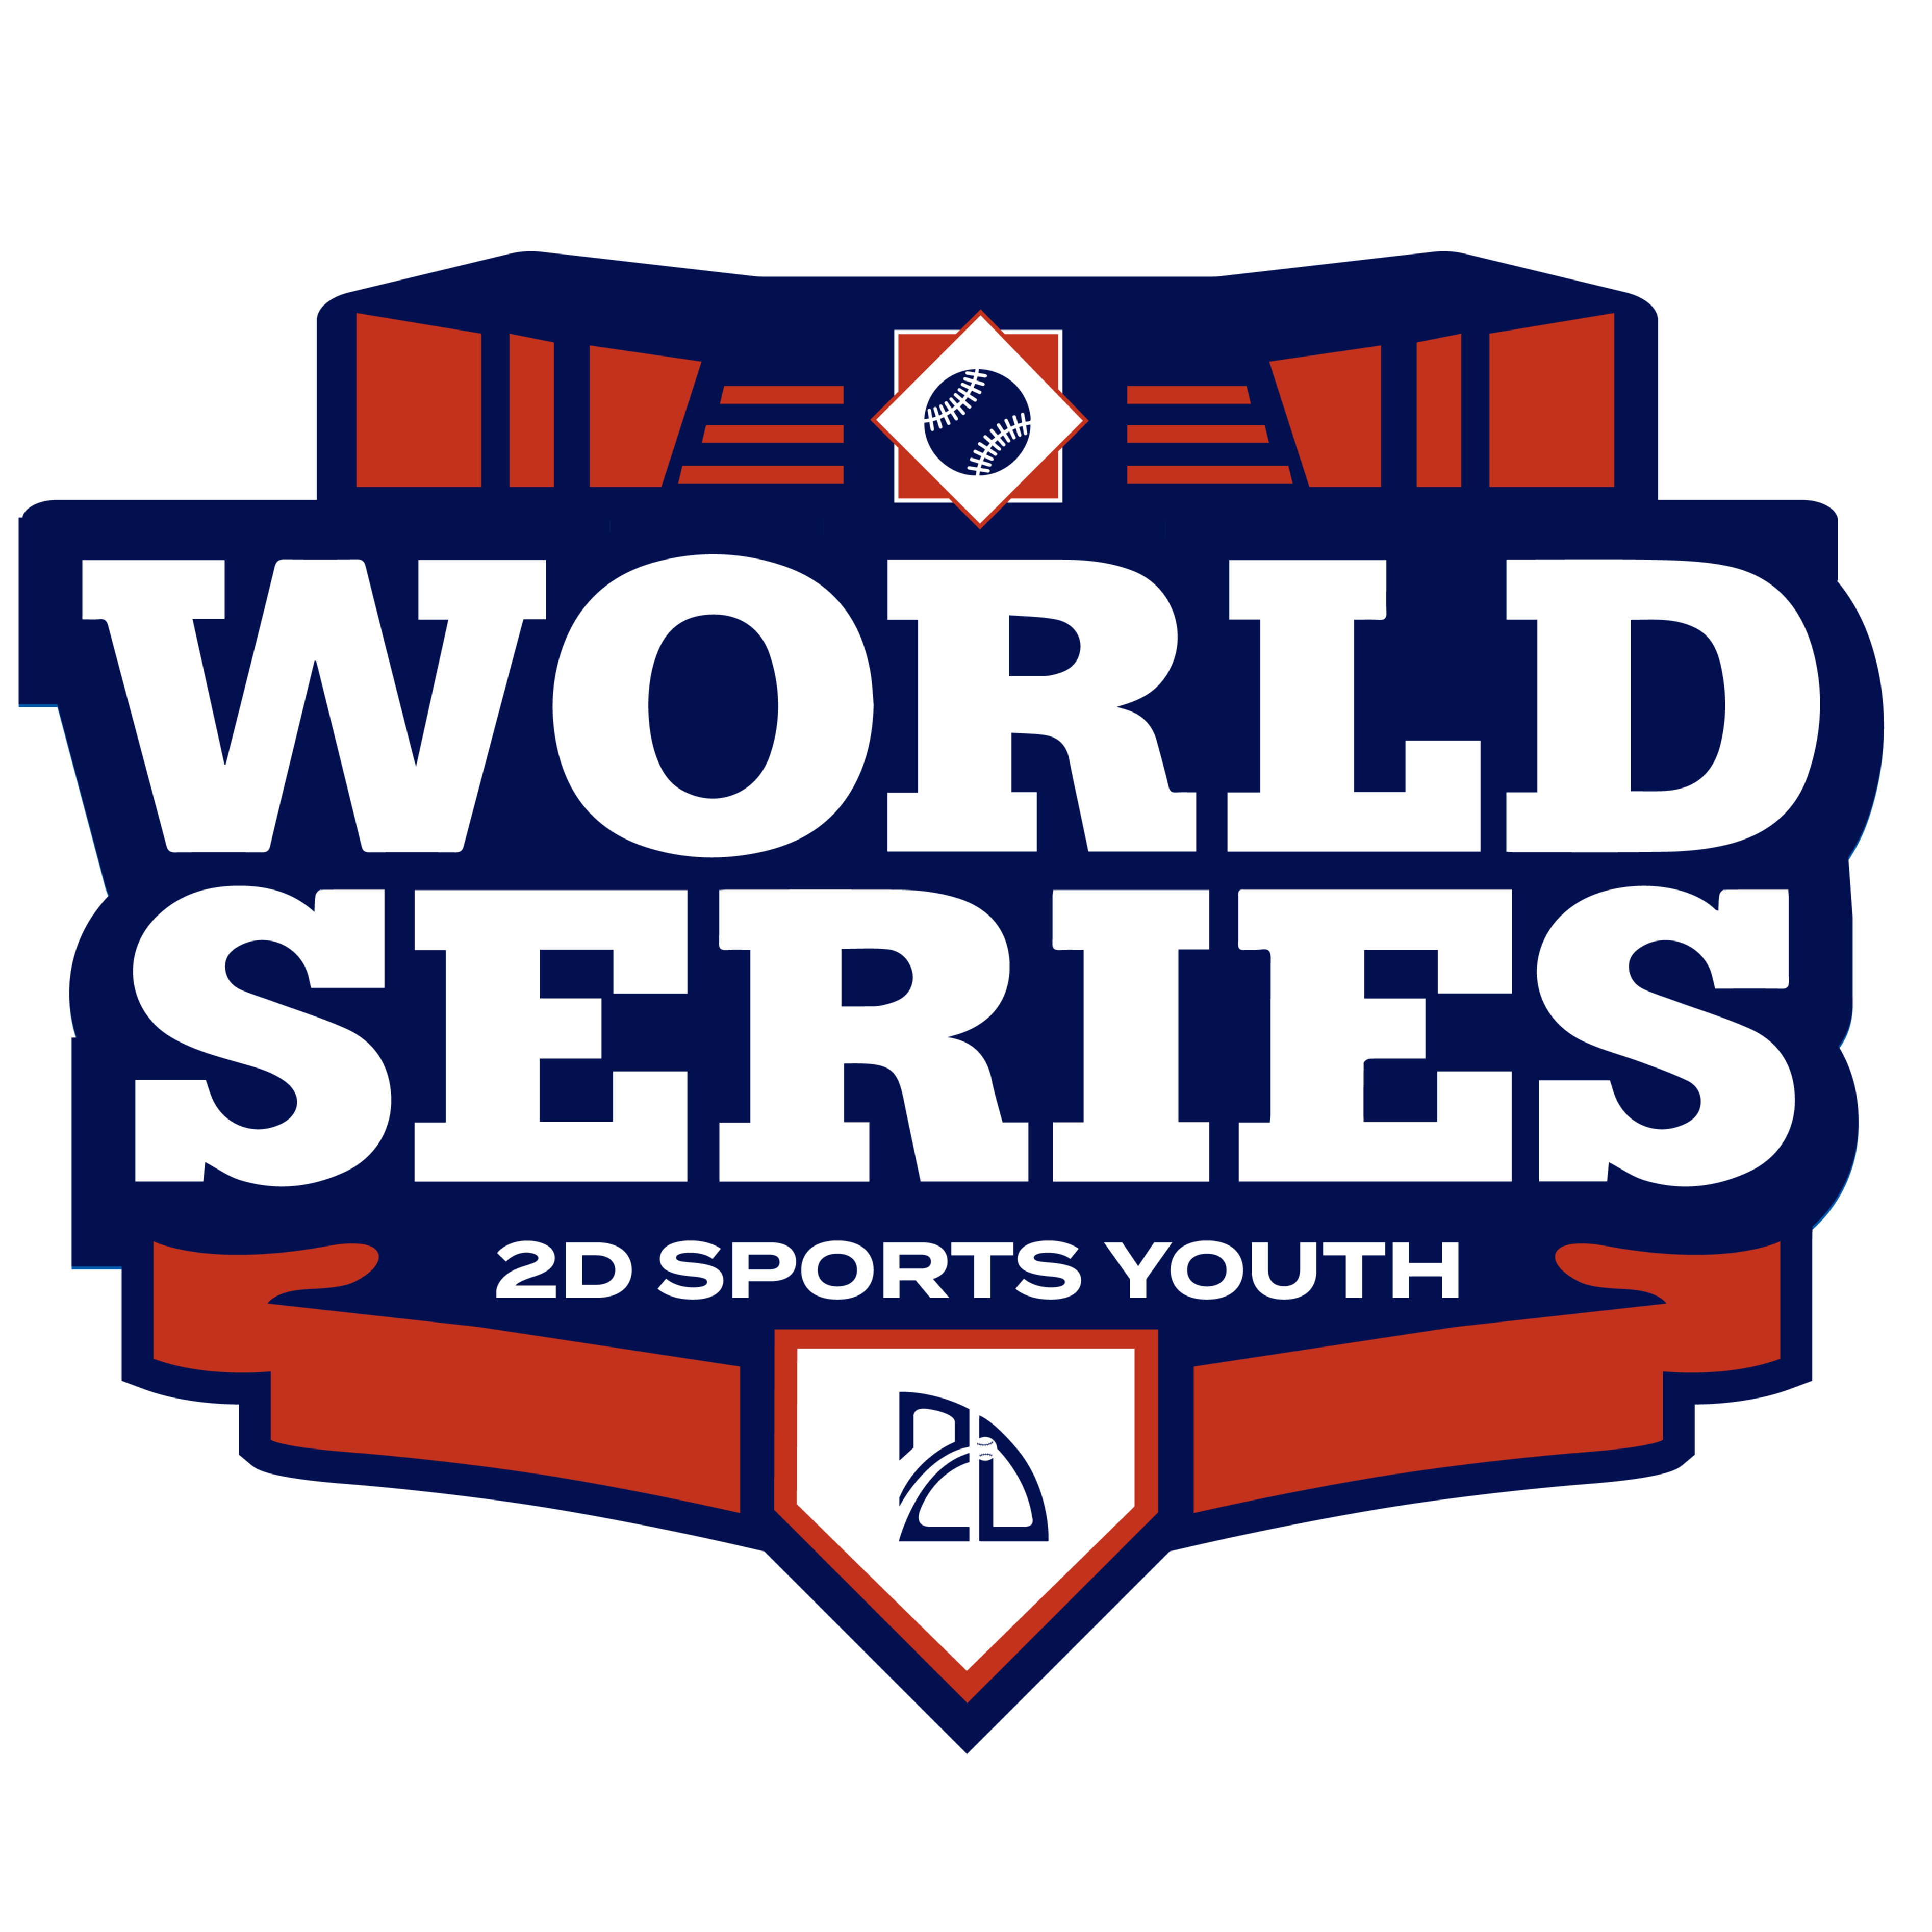 2D Coach Pitch World Series - Powered by Marucci